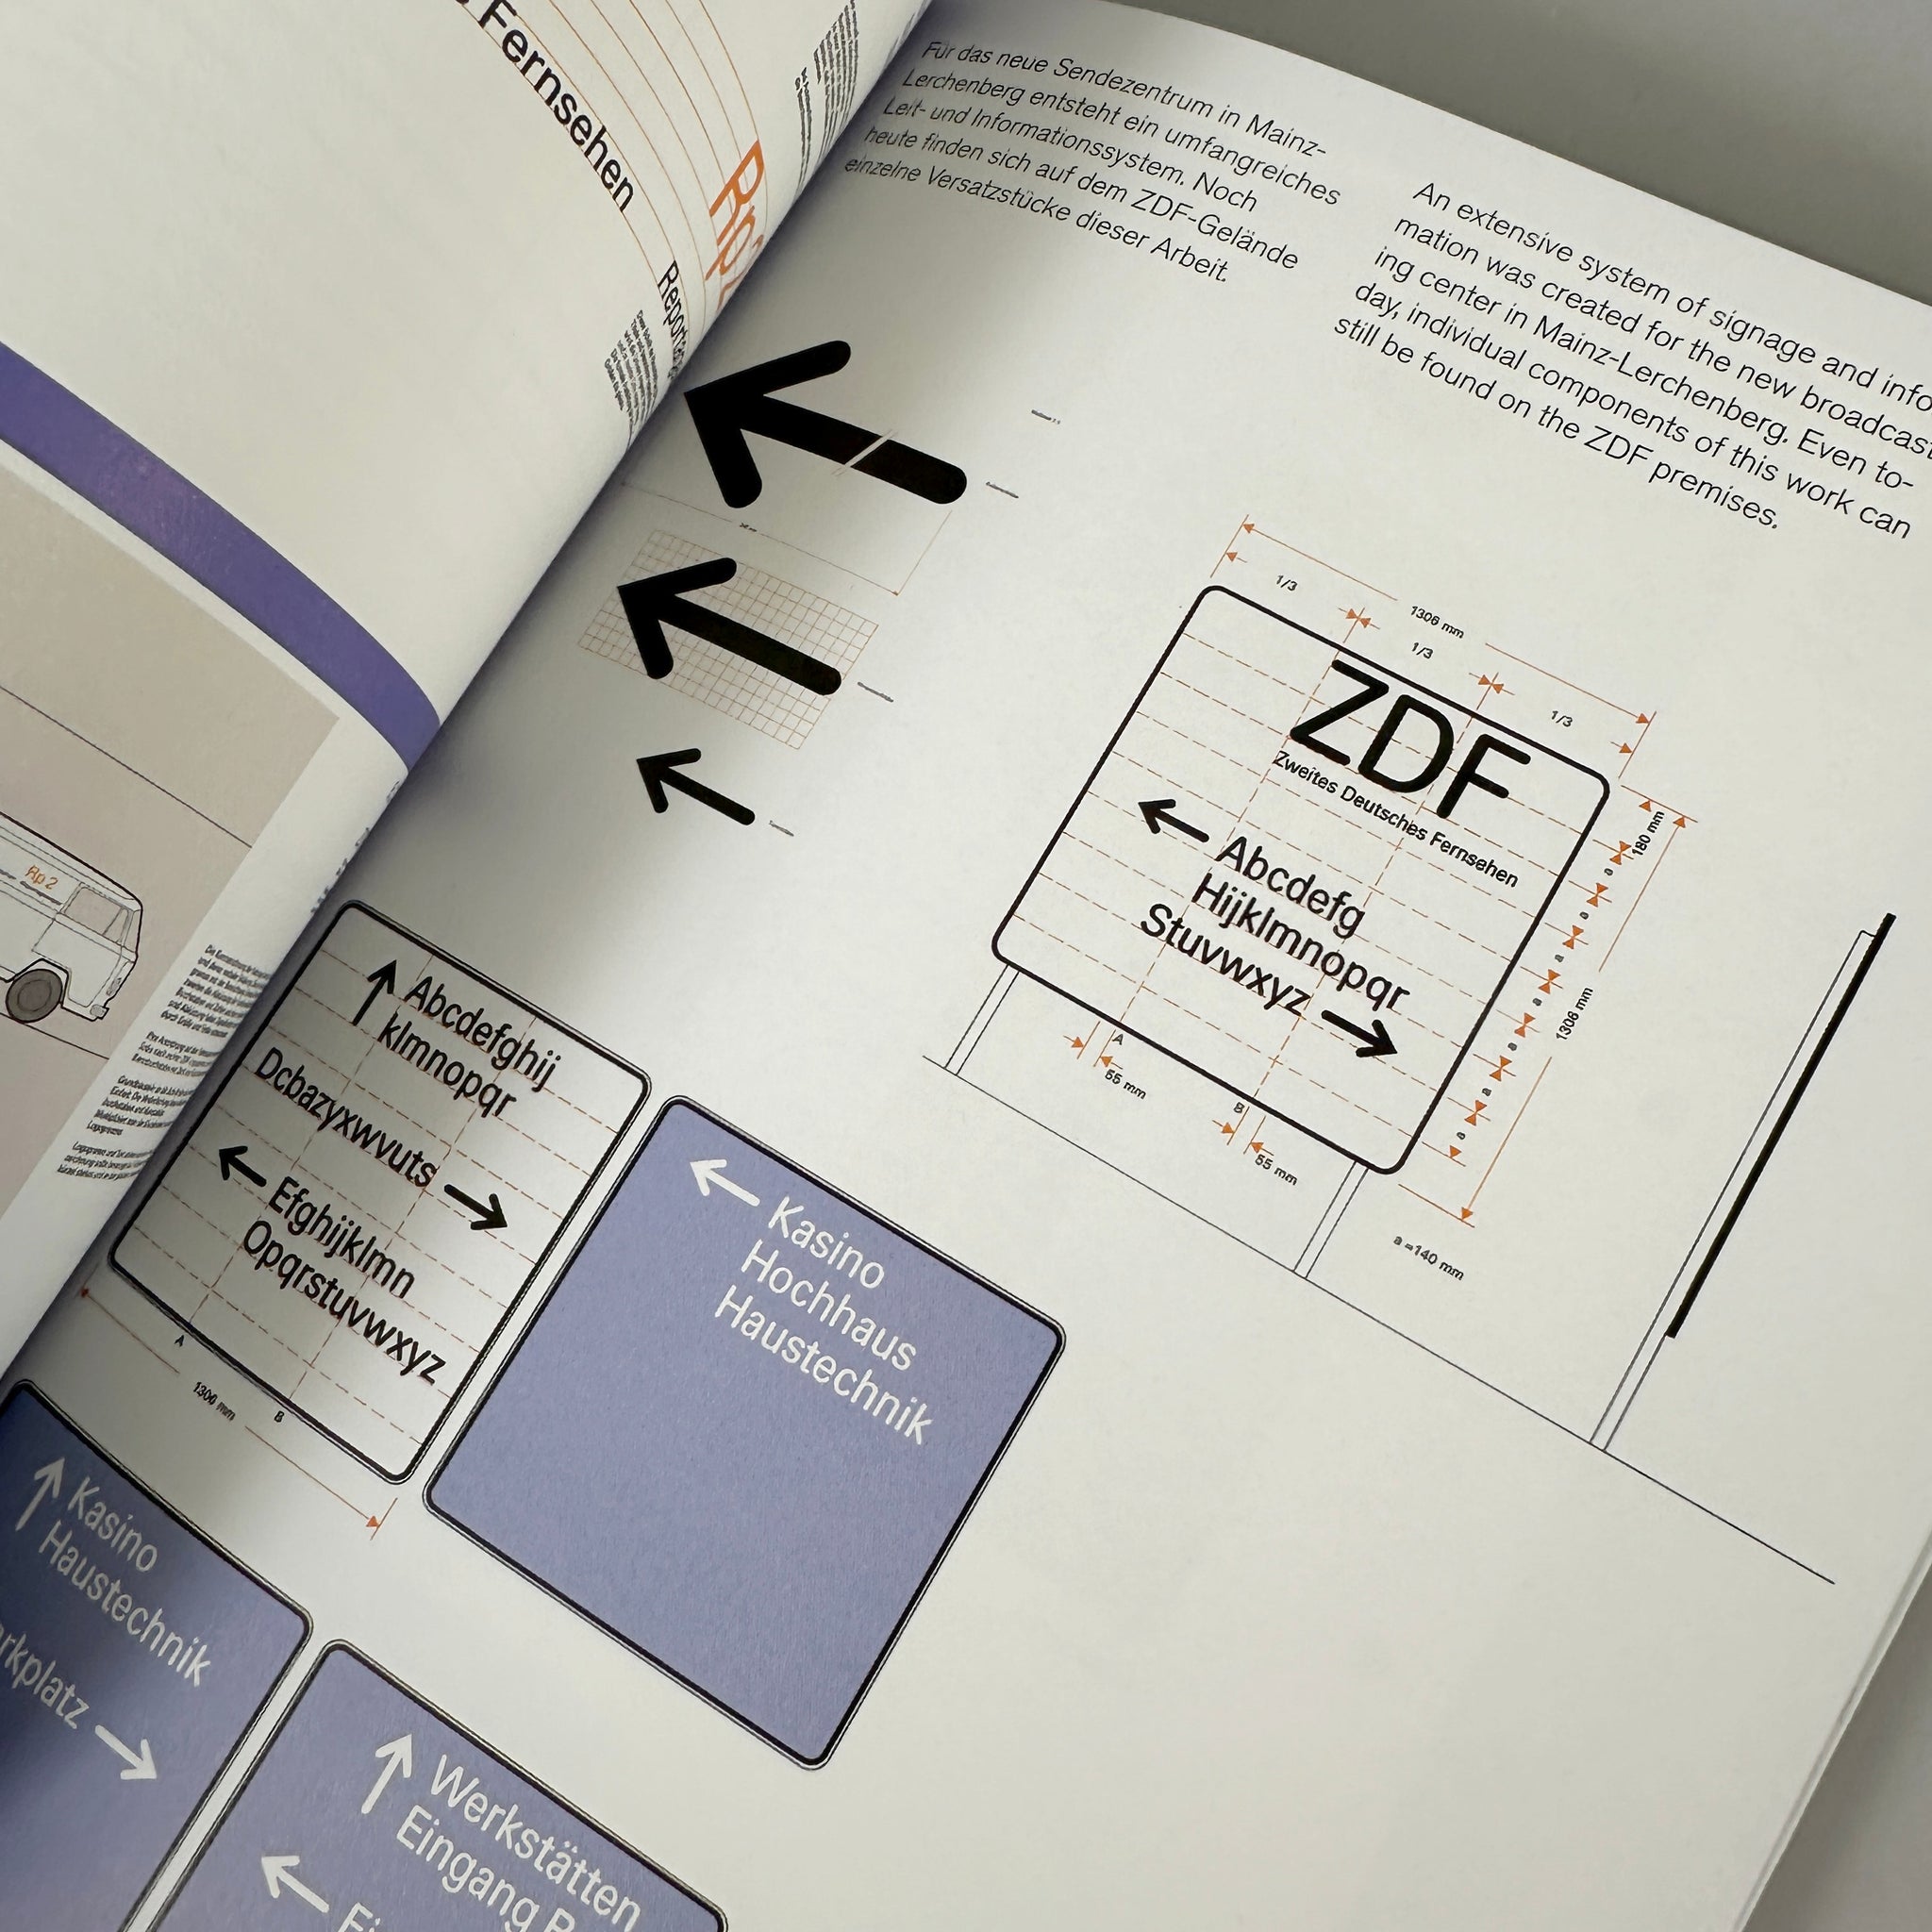 ZDF TV+Design: Six Decades of Television and Brand Design